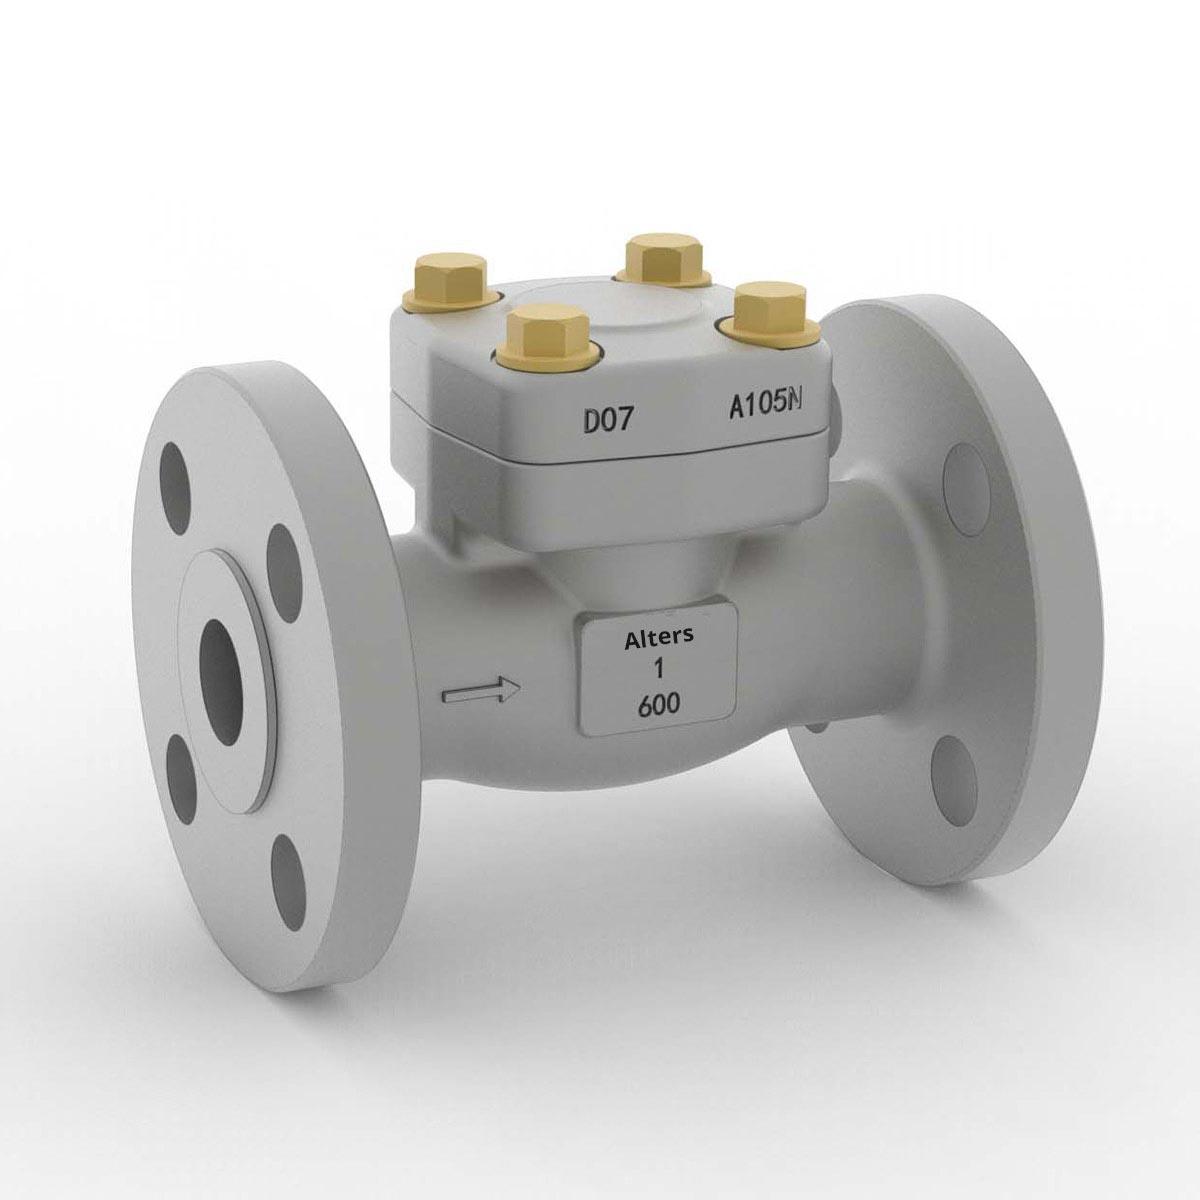 Image of a check valve from AlterValve with company name and specifications for one-way flow control.